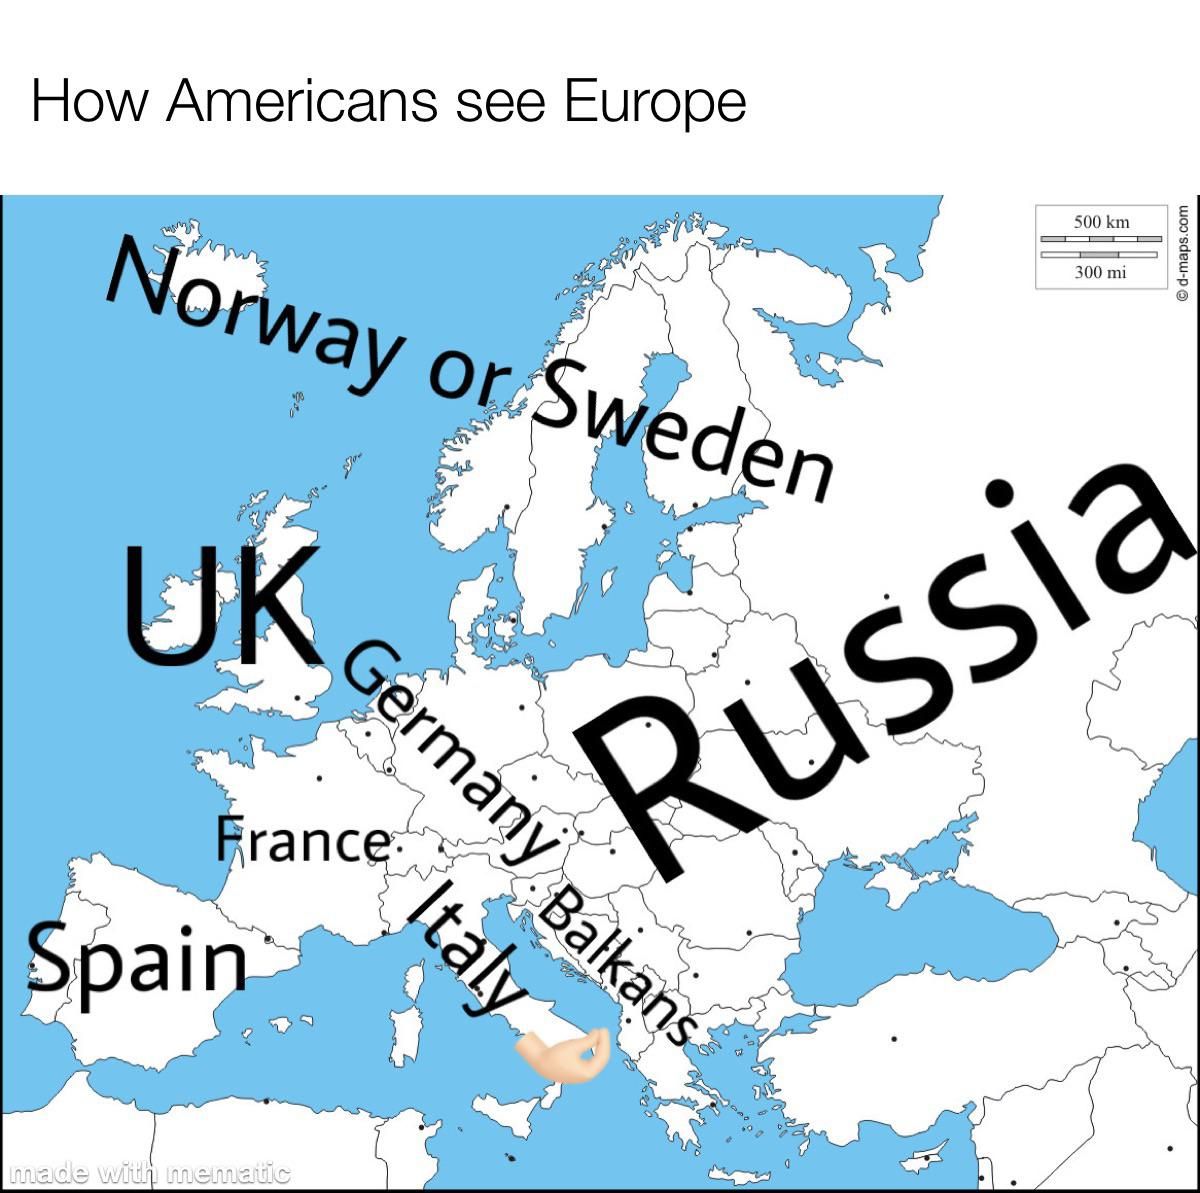 The battle between Americans and Europeans continues